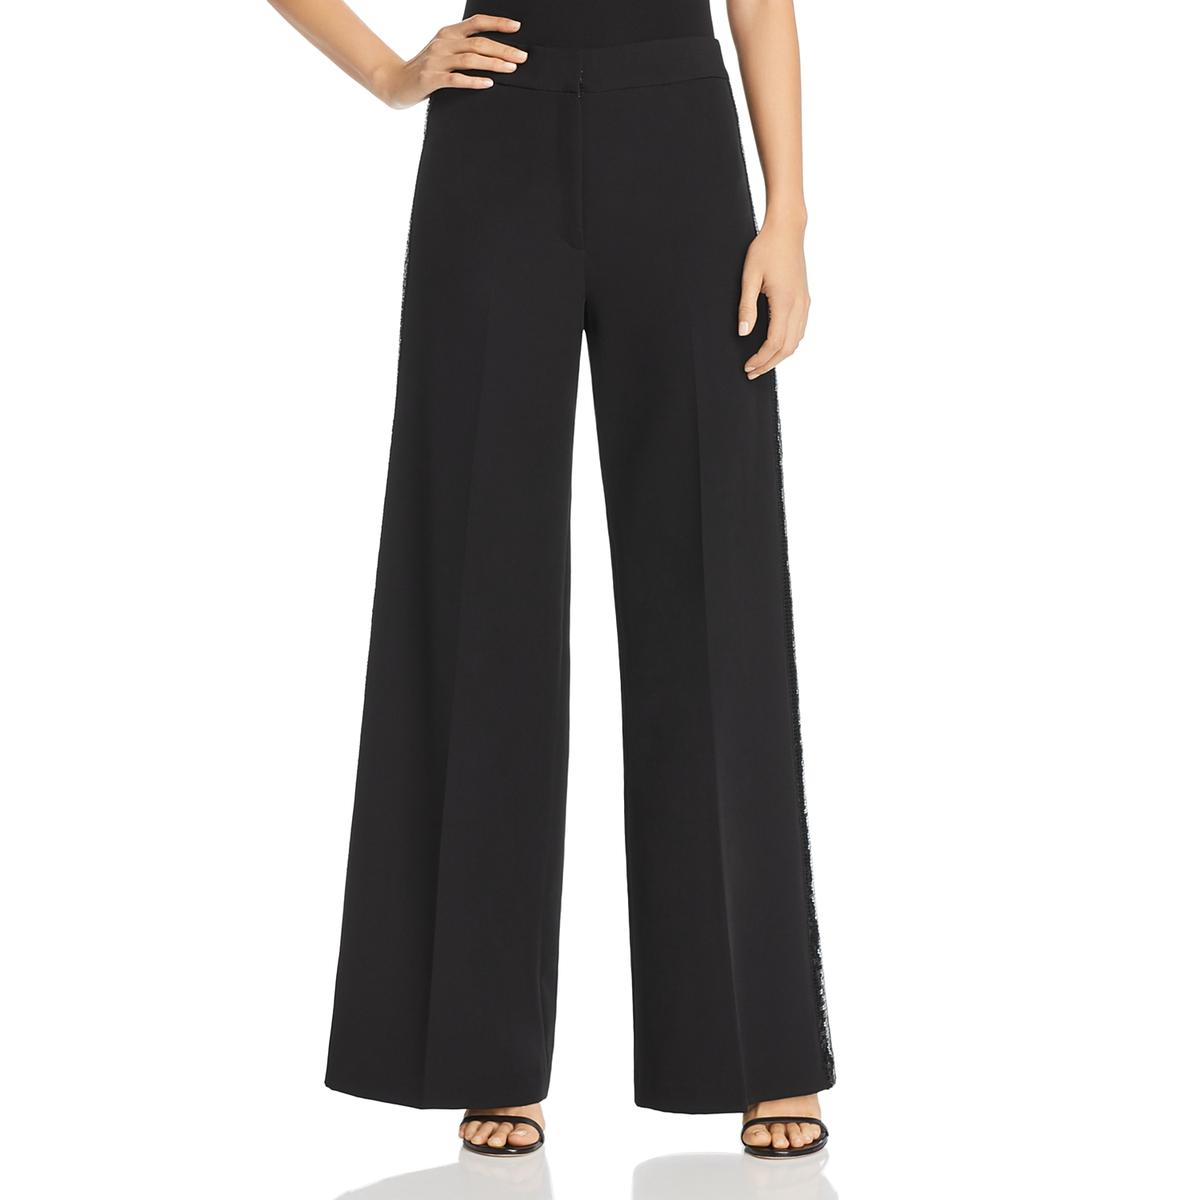 Milly Womens Black Sequined Wide Leg Dress Pants Trousers 10 BHFO 2824 ...